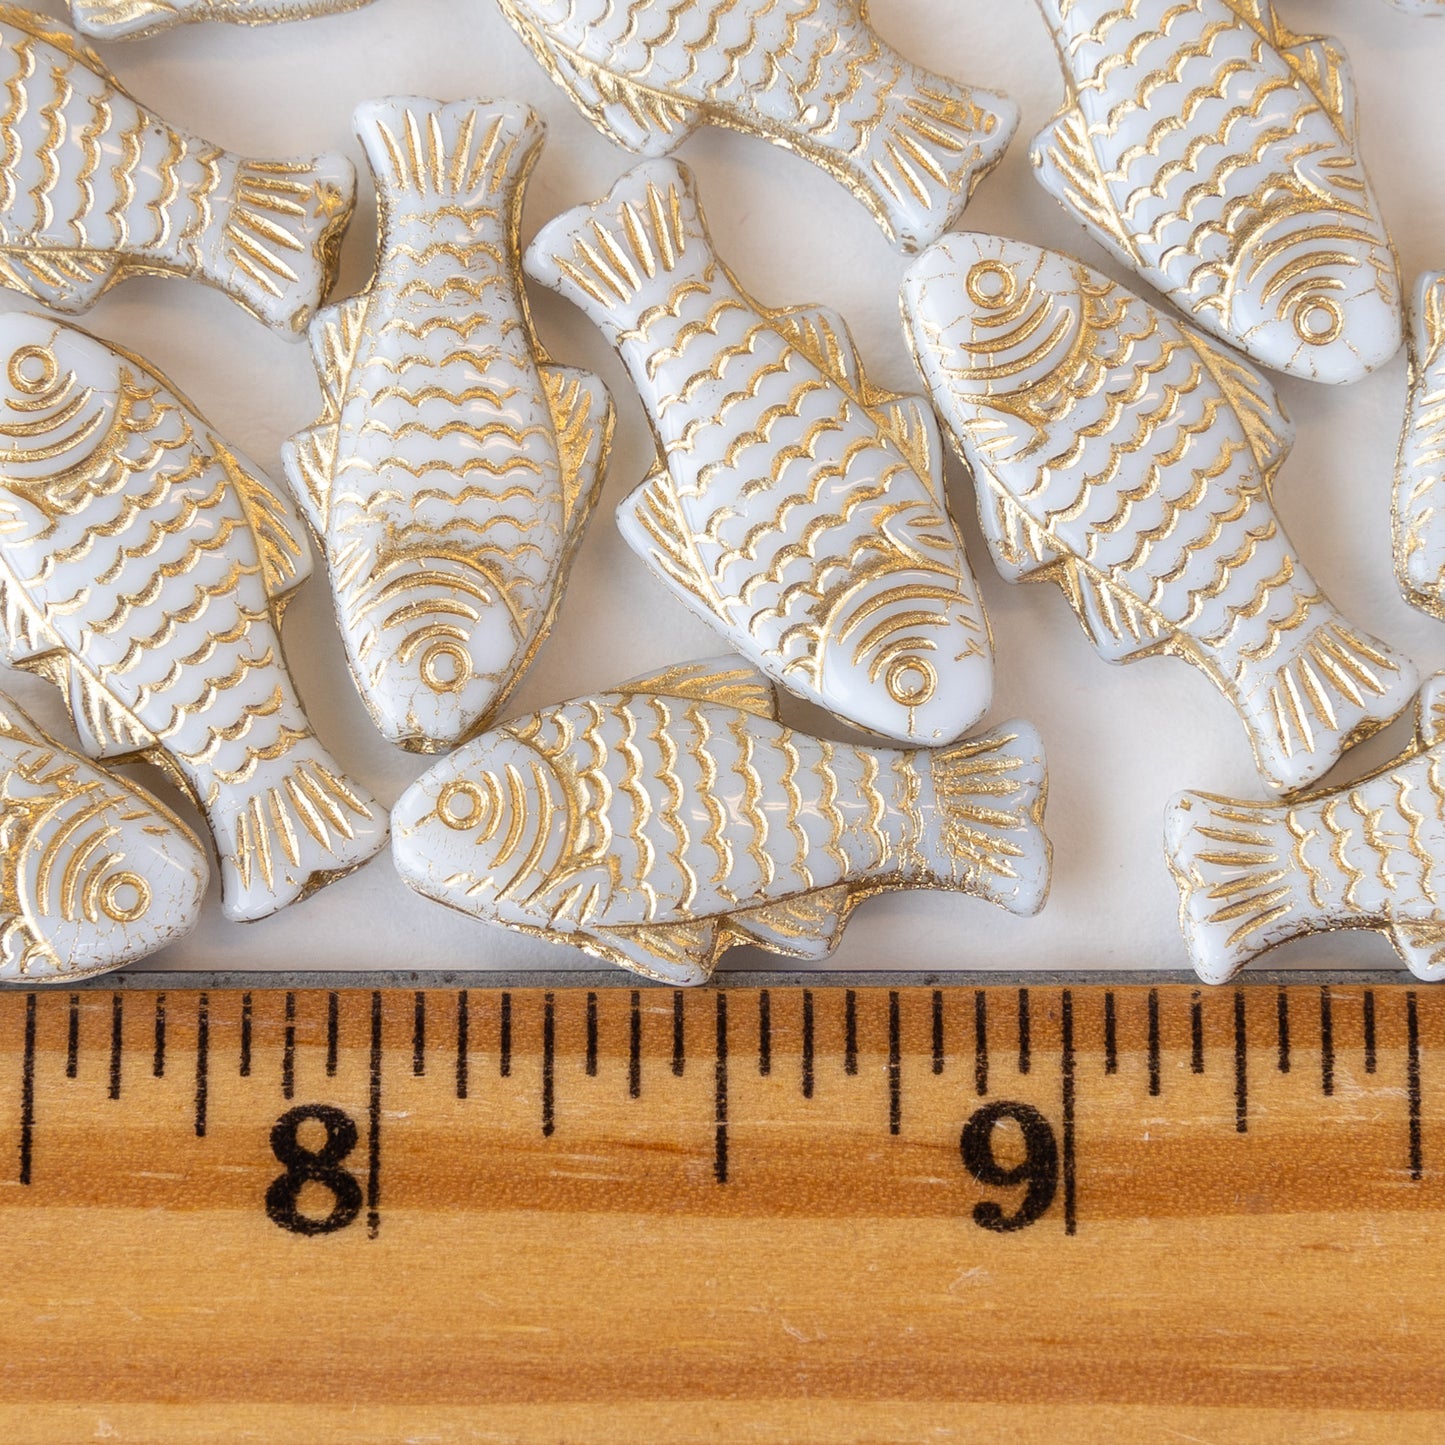 Glass Fish Beads - Ivory with Gold Wash - 6 or 12